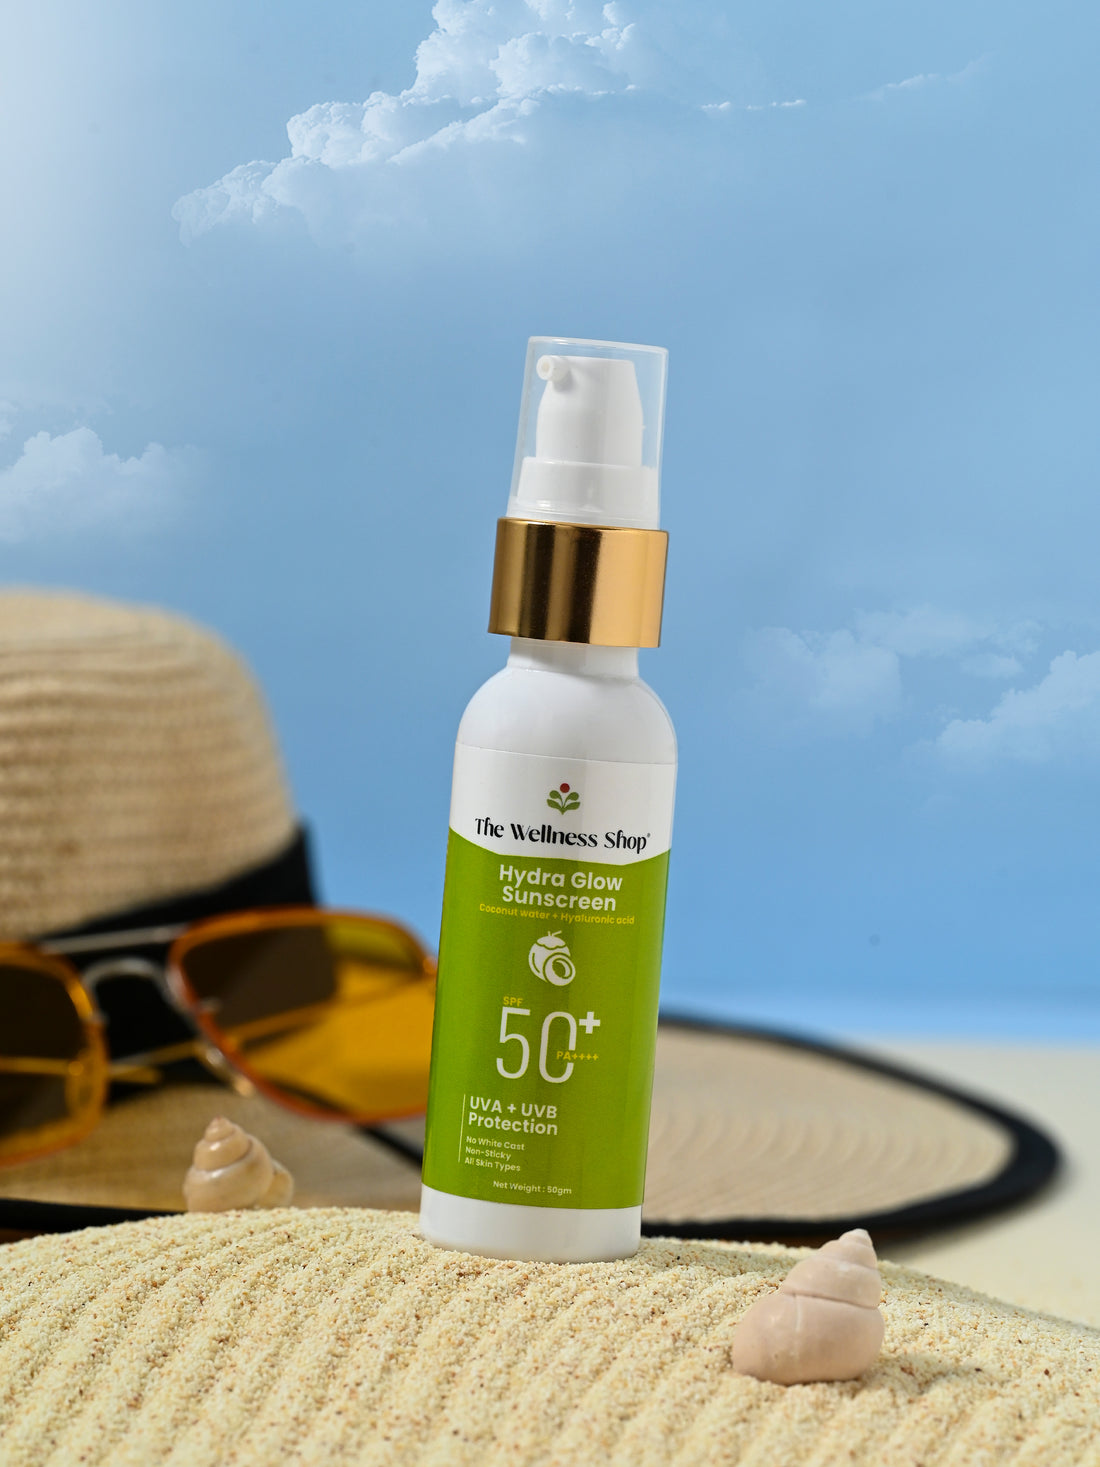 HYDRA GLOW SUNSCREEN (COCONUT WATER + HYALURONIC ACID) WITH SPF 50 PA ++++